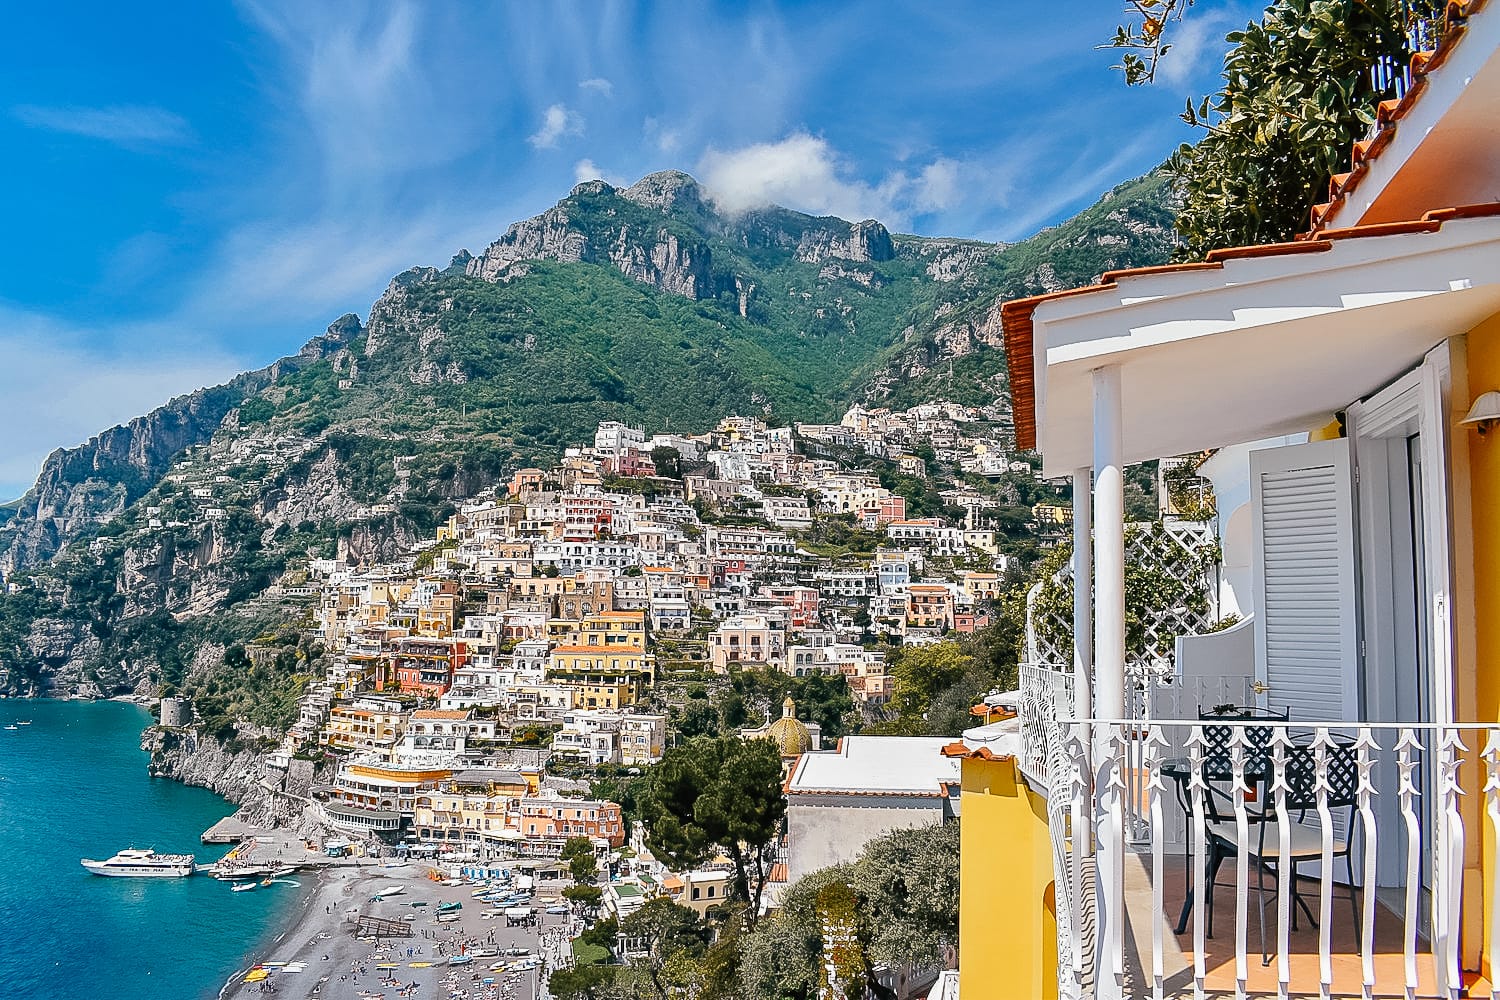 25 Things to Do in Positano Like a Local: Where to Eat, Play, and